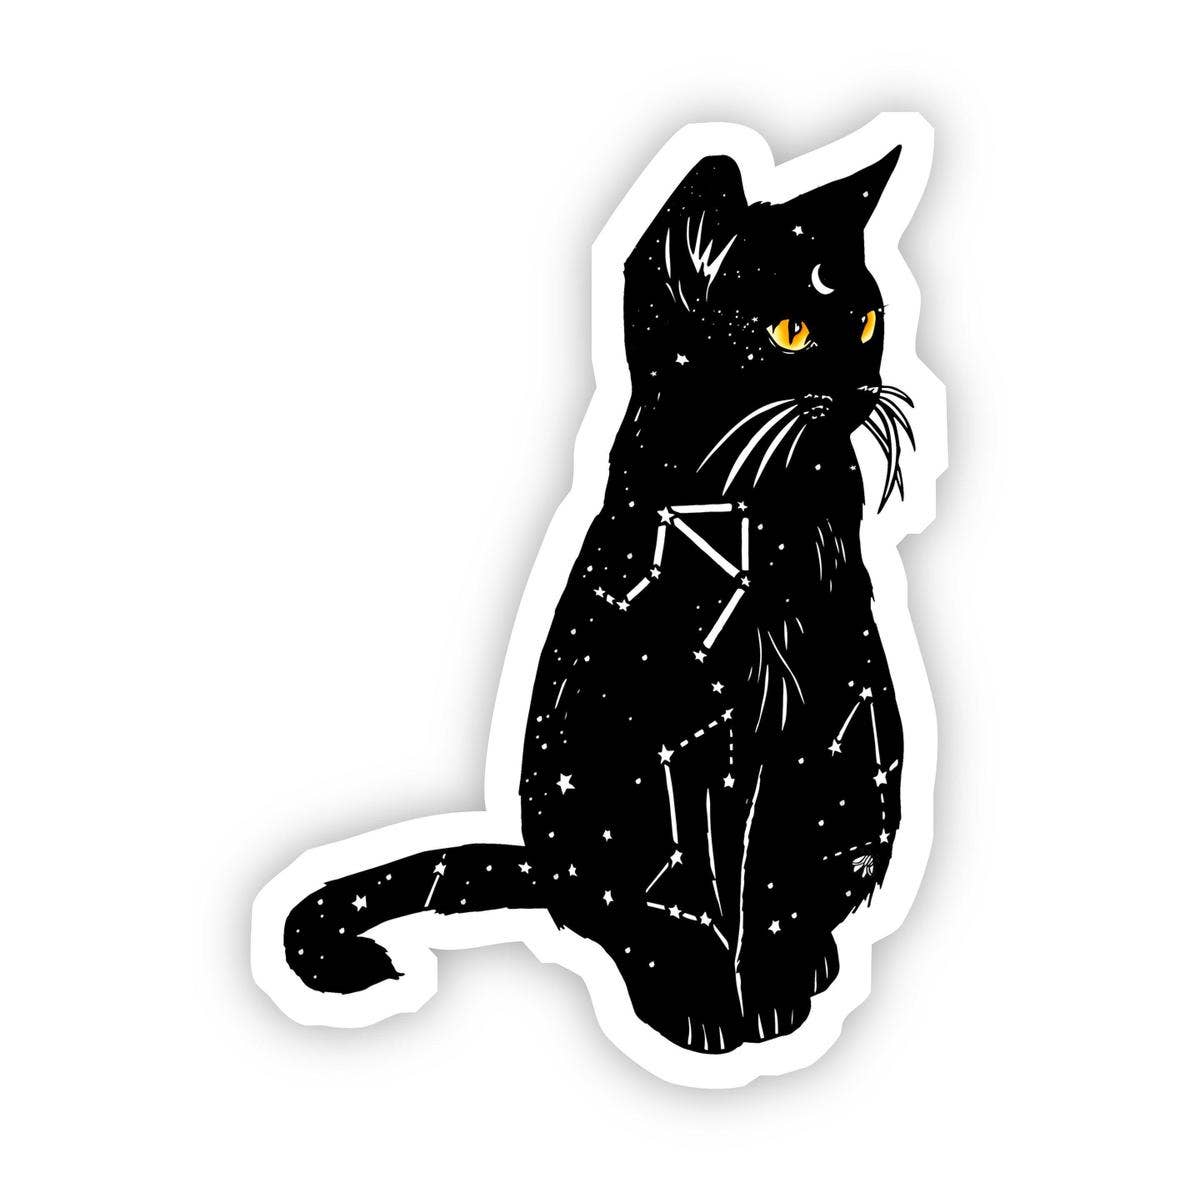 Big Moods - Black Cat with Yellow Eyes and Constellation Sticker